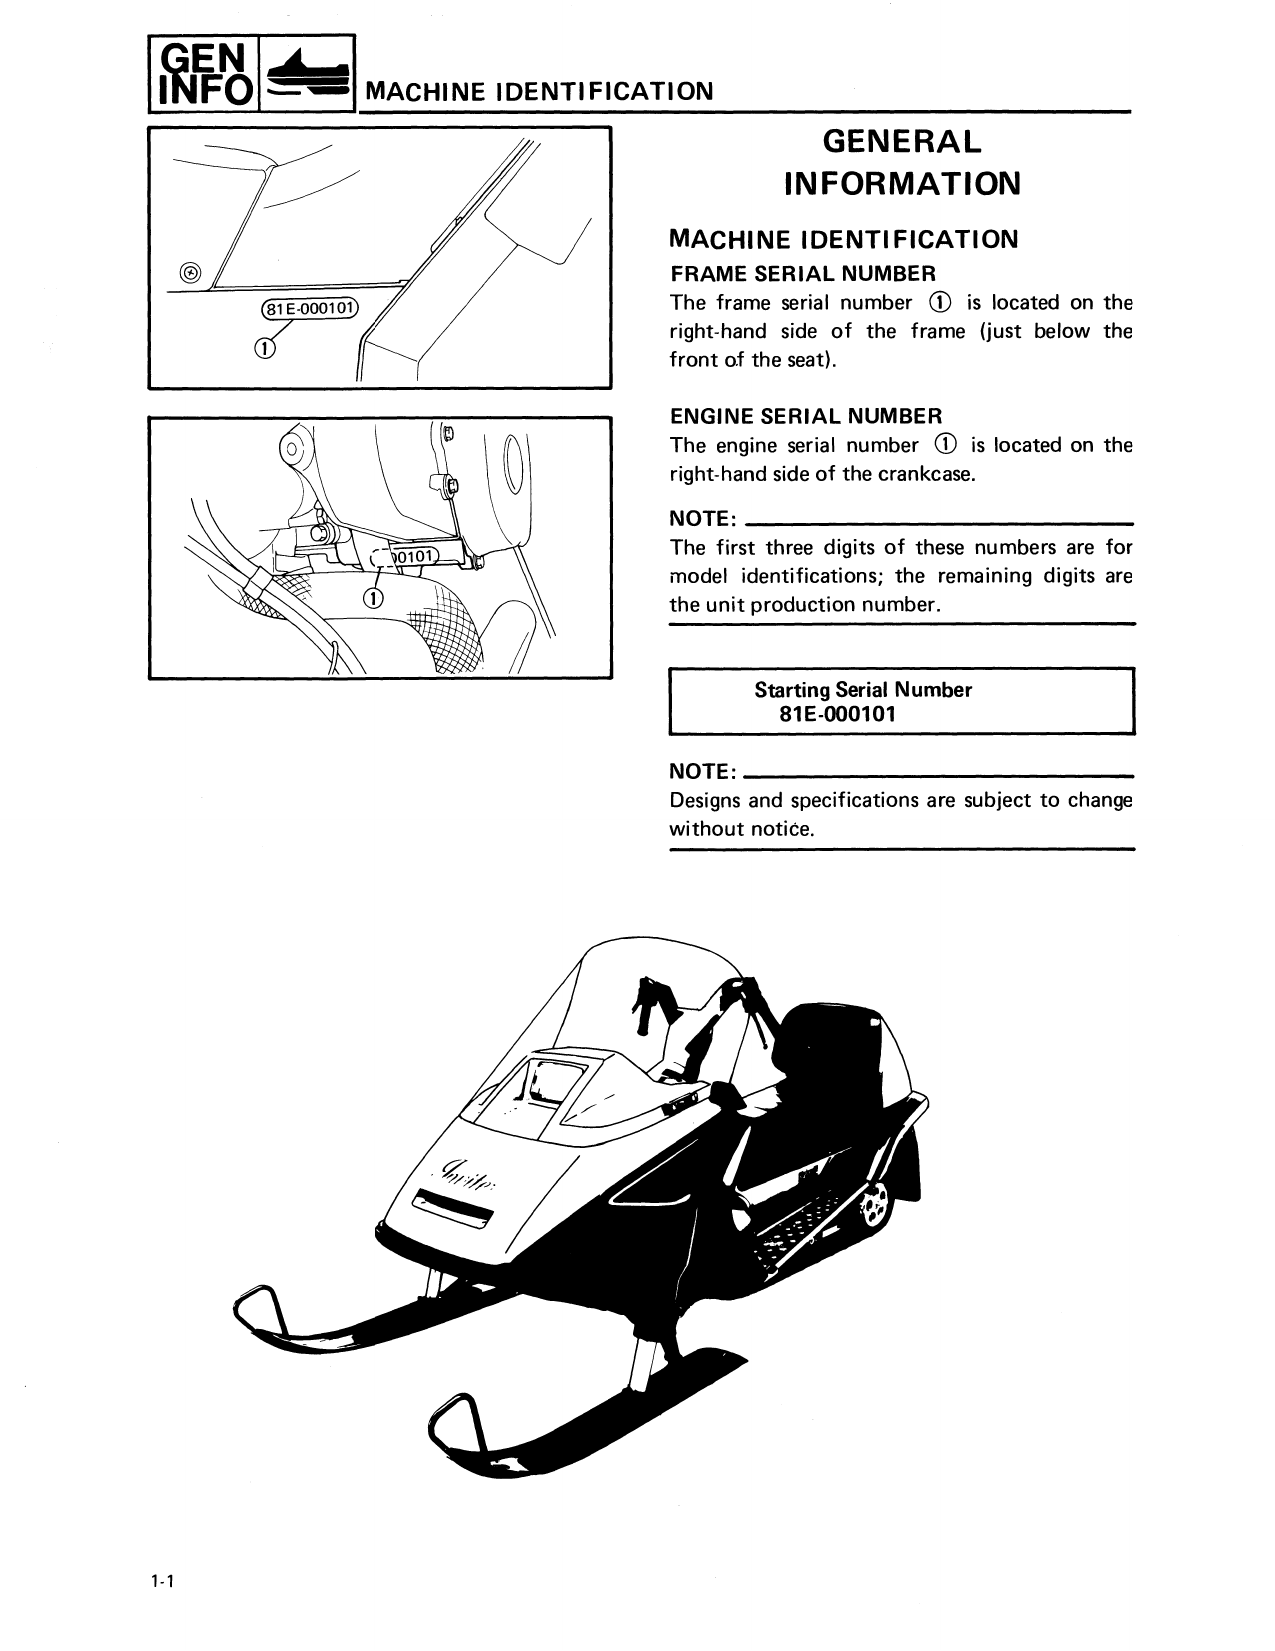 1986-1990 Yamaha Inviter 300, CF300 snowmobile service manual Preview image 4